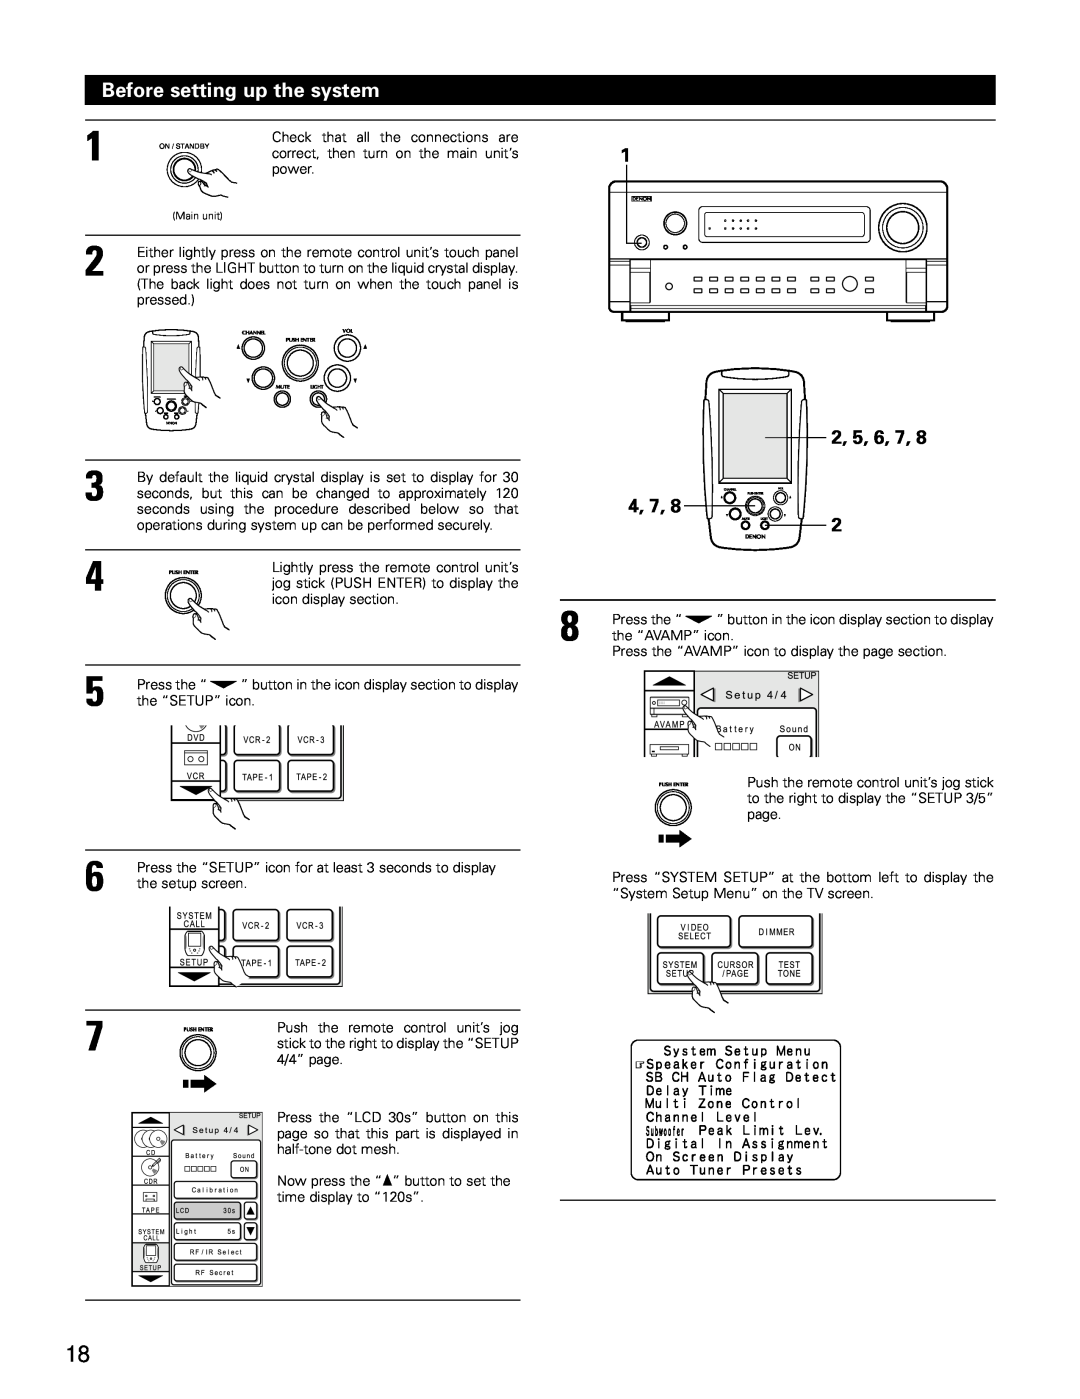 Denon AVR-4802 manual Before setting up the system, 4, 7, 2, 5, 6, 7, 2 